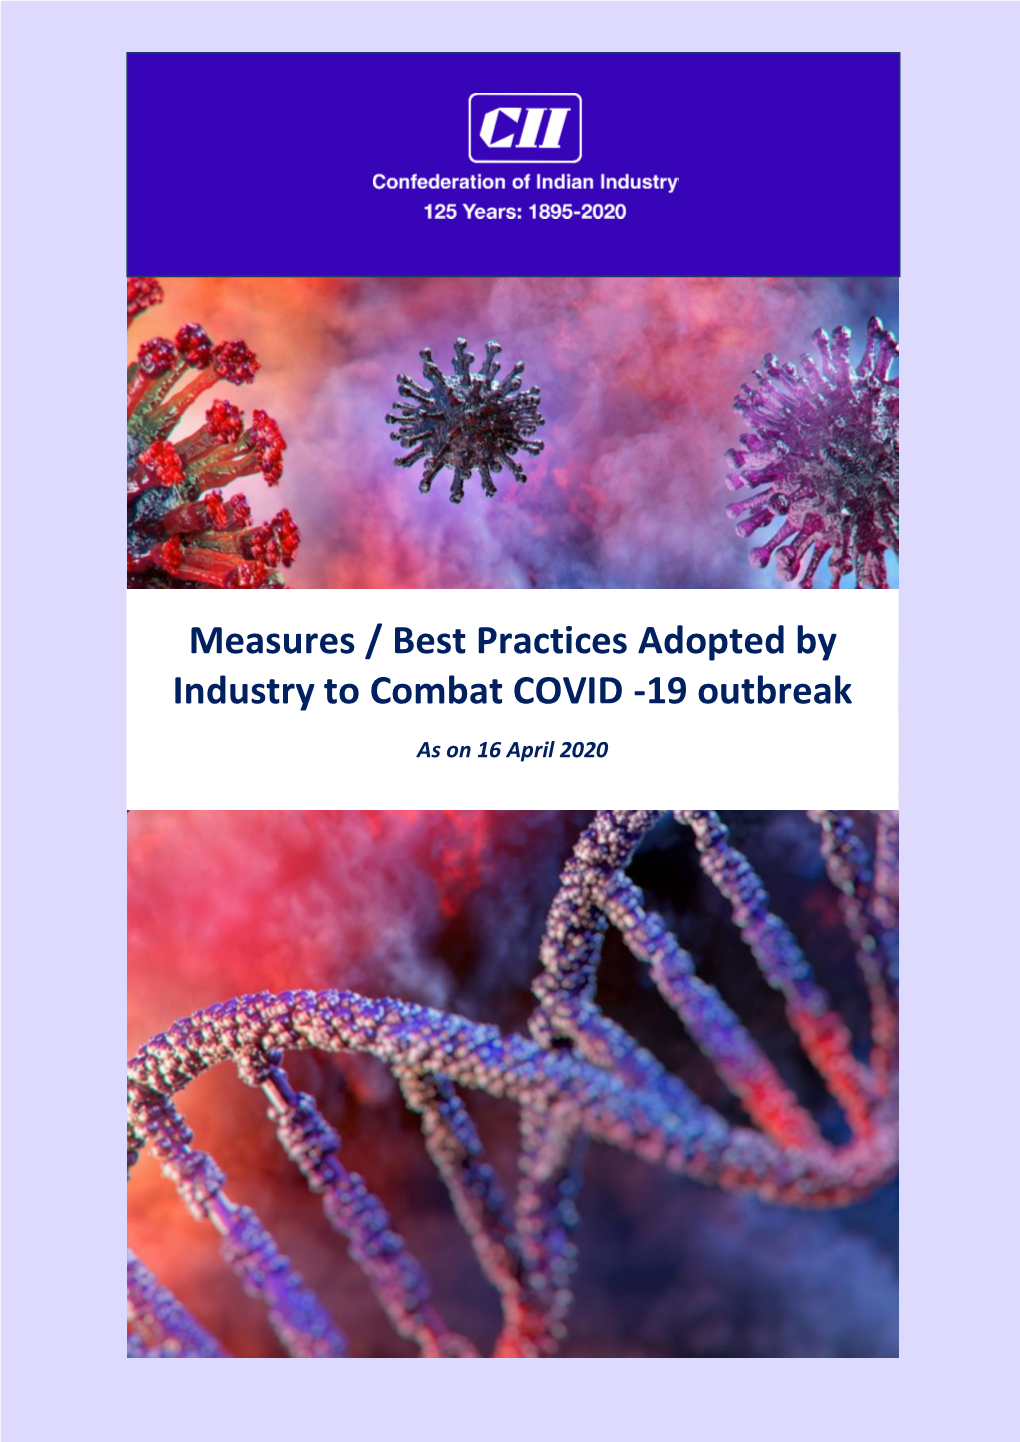 Measures / Best Practices Adopted by Industry to Combat COVID -19 Outbreak